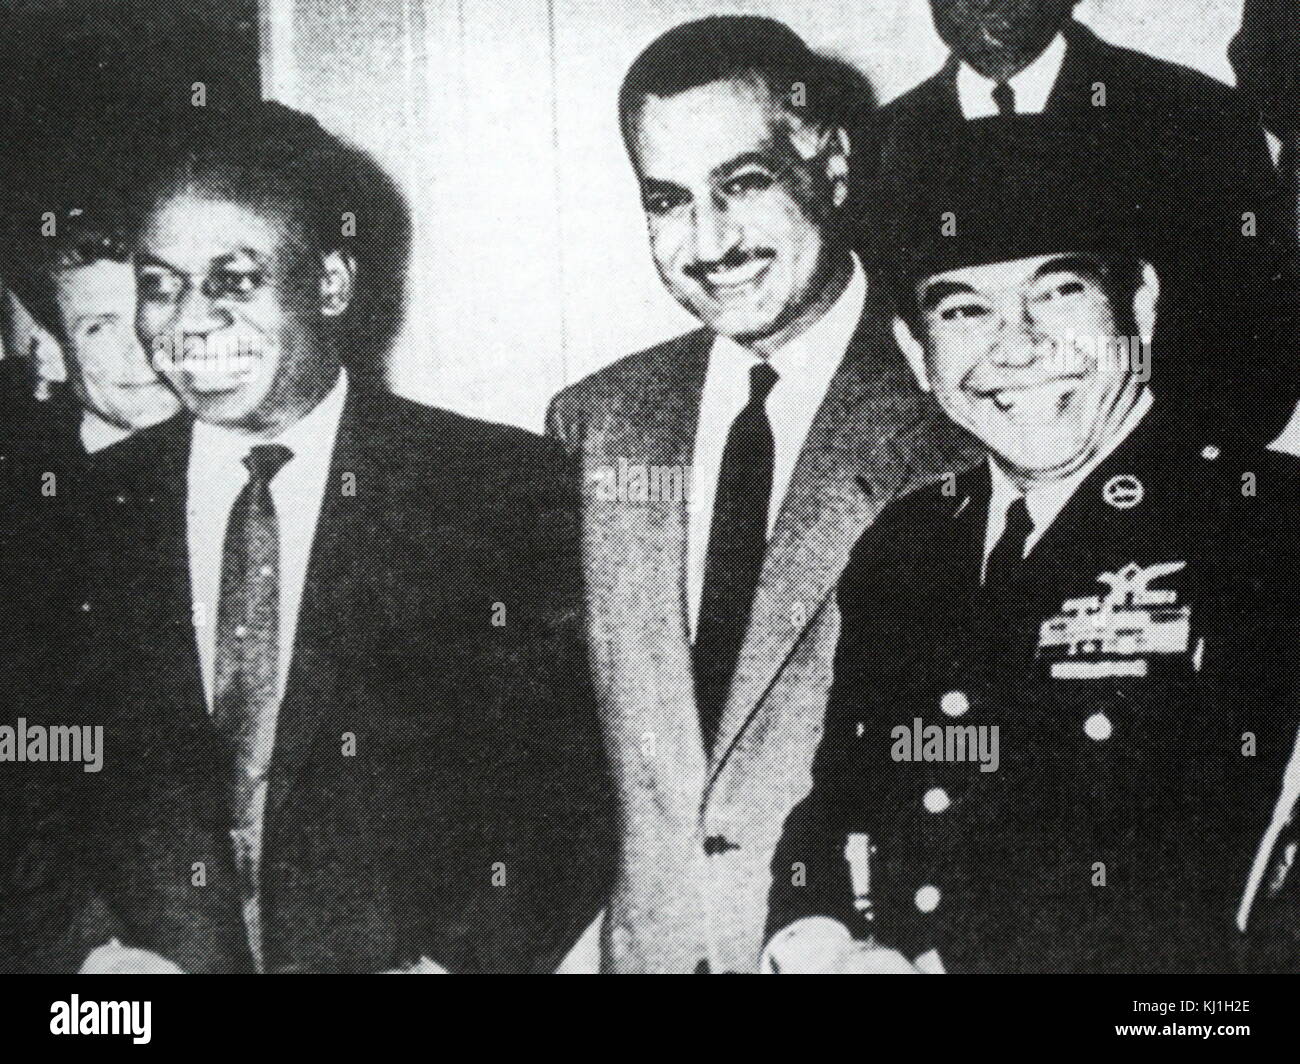 Left to right: Non-Aligned movement meeting with Ghana's Kwame Nkrumah, Egypt's Gamal Nasser and Indonesia's Ahmed Sukarno. Circa 1960 Stock Photo